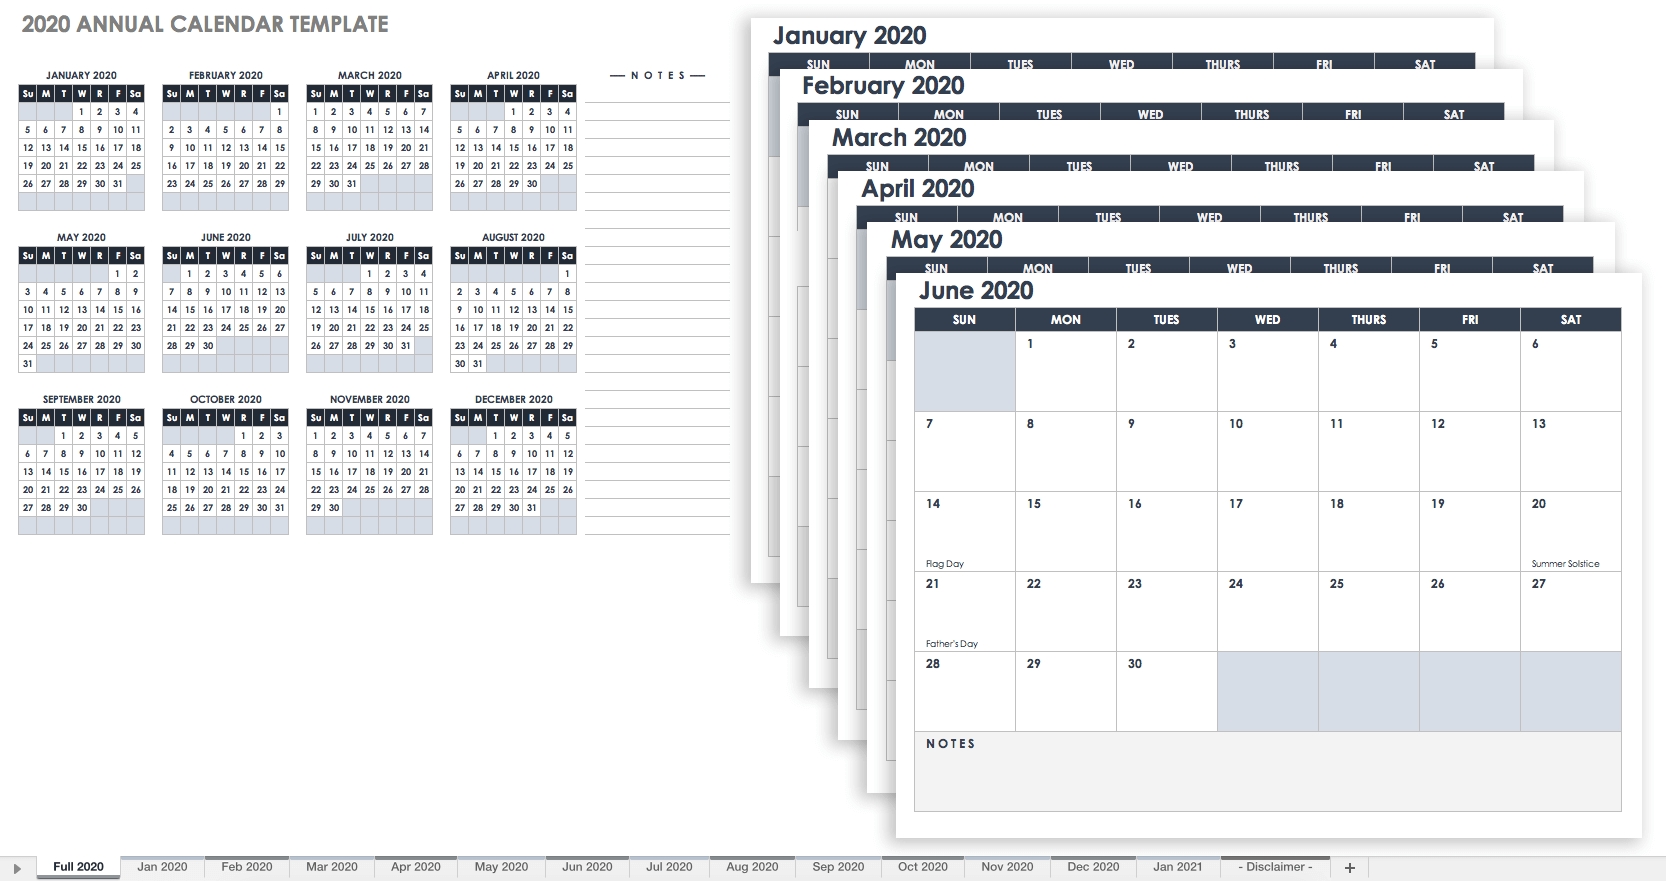 Free Blank Calendar Templates - Smartsheet Monthly Calendar Without Dates